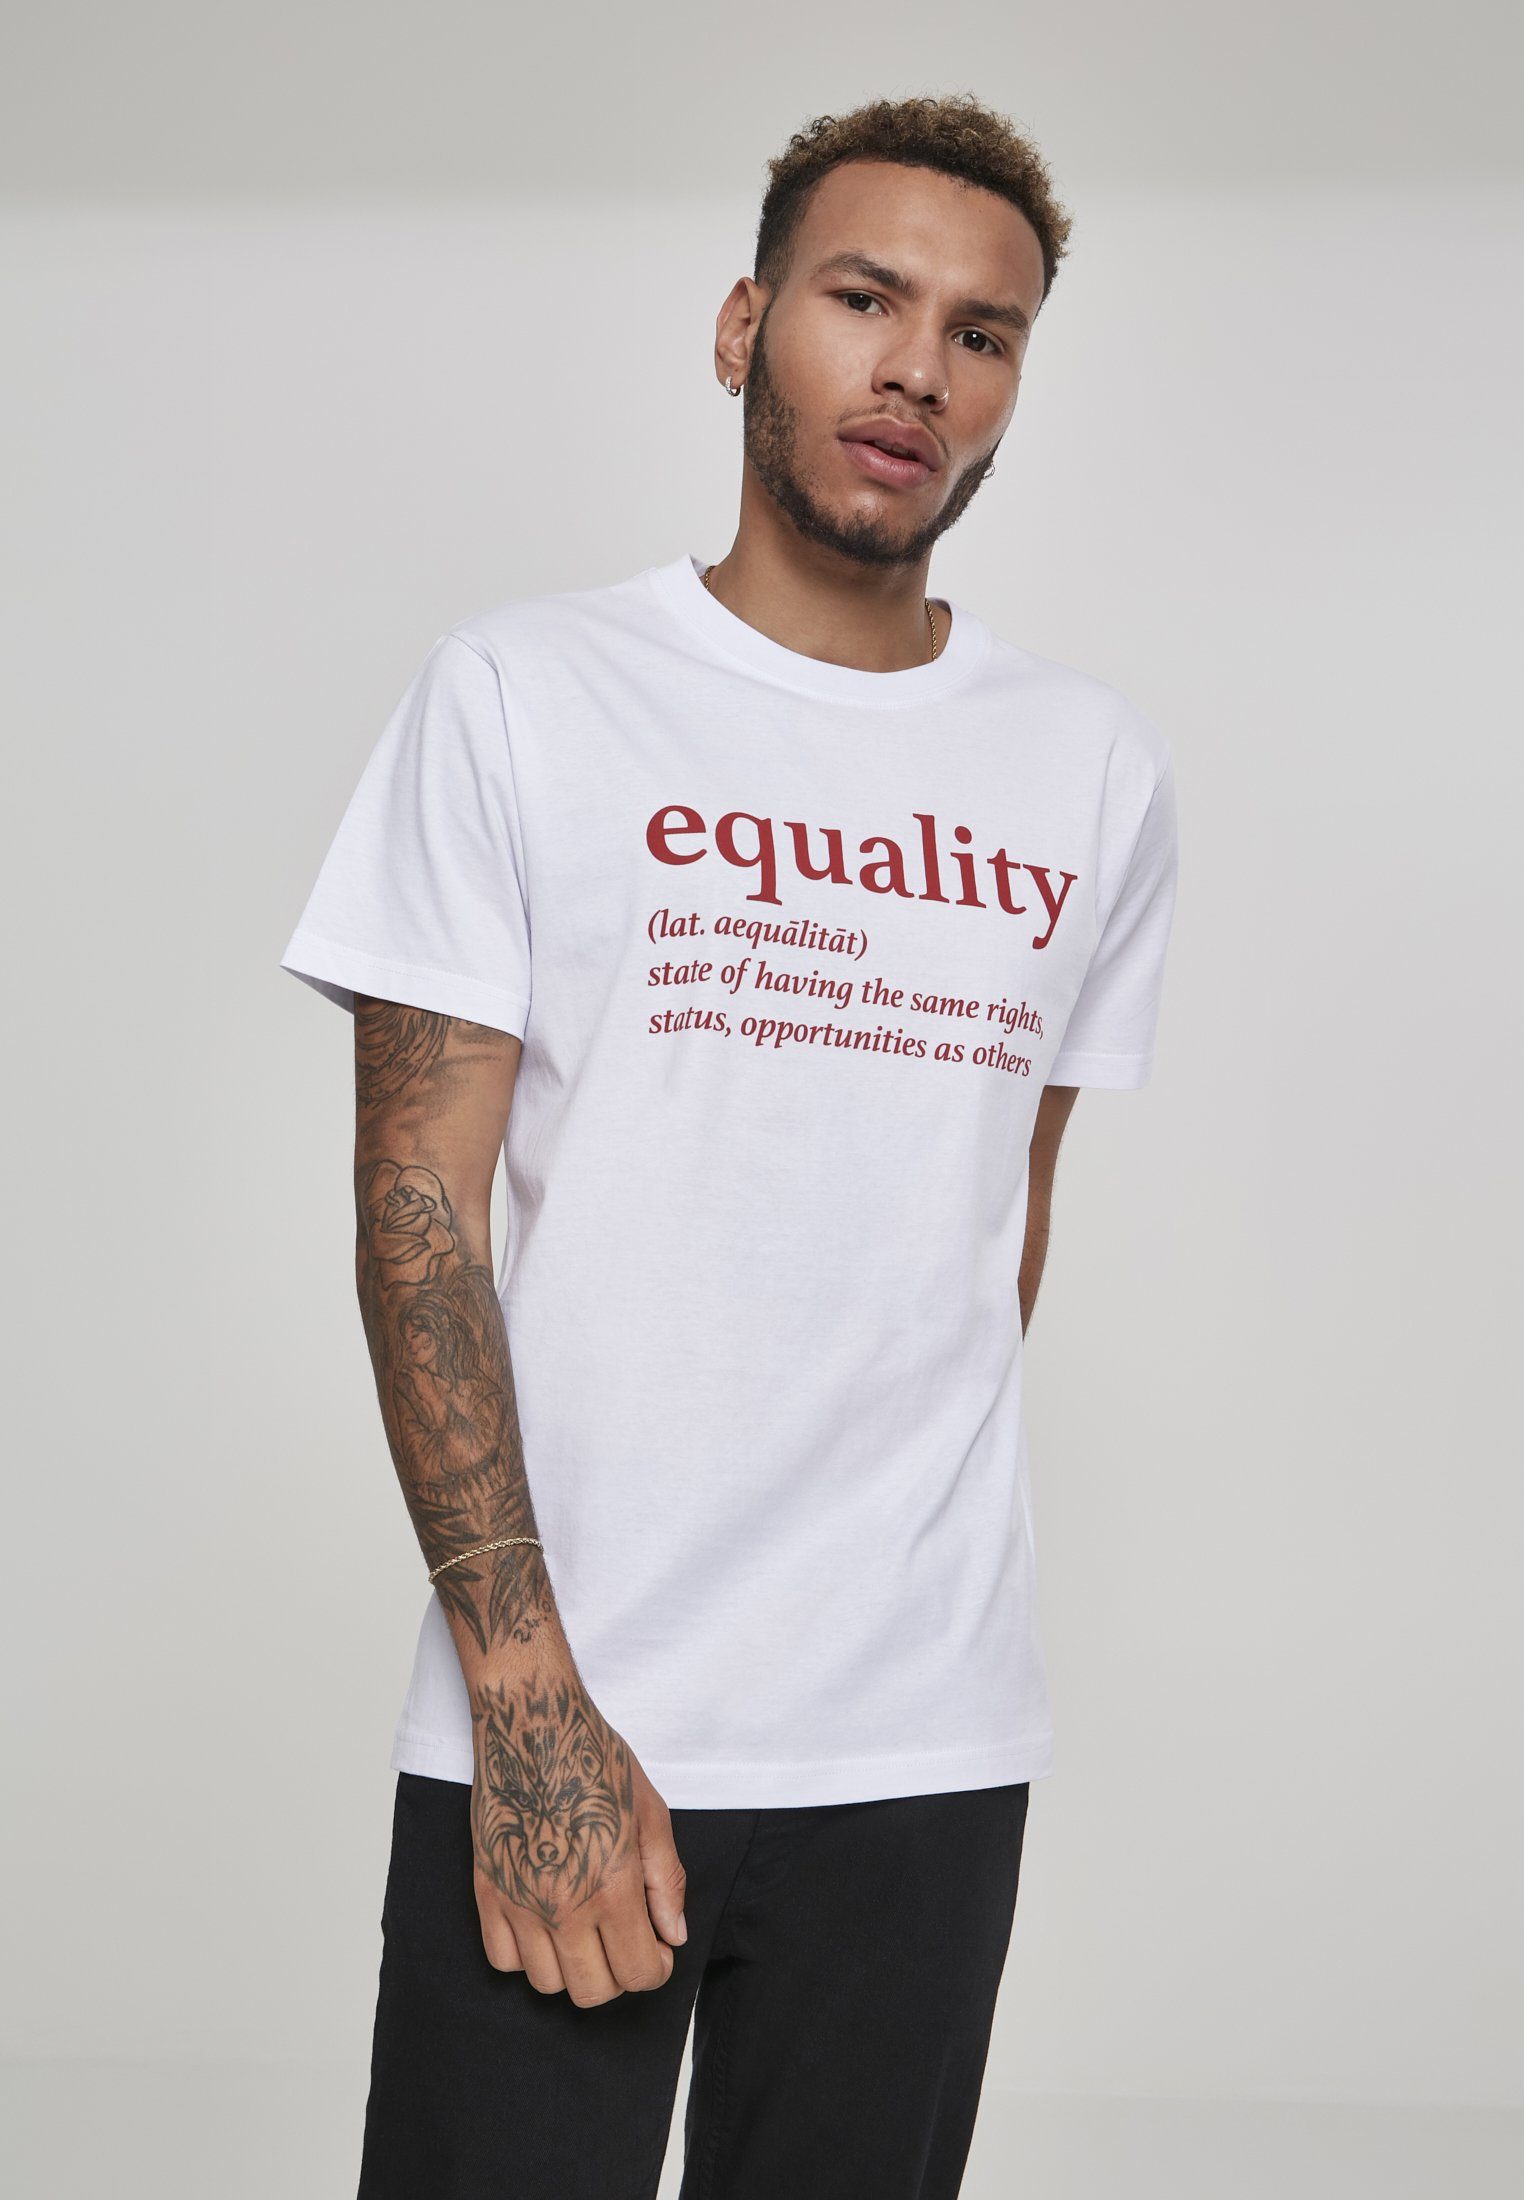 Herren Definition white MT732 Equality Equality Definition (1-tlg) T-Shirt Tee MisterTee